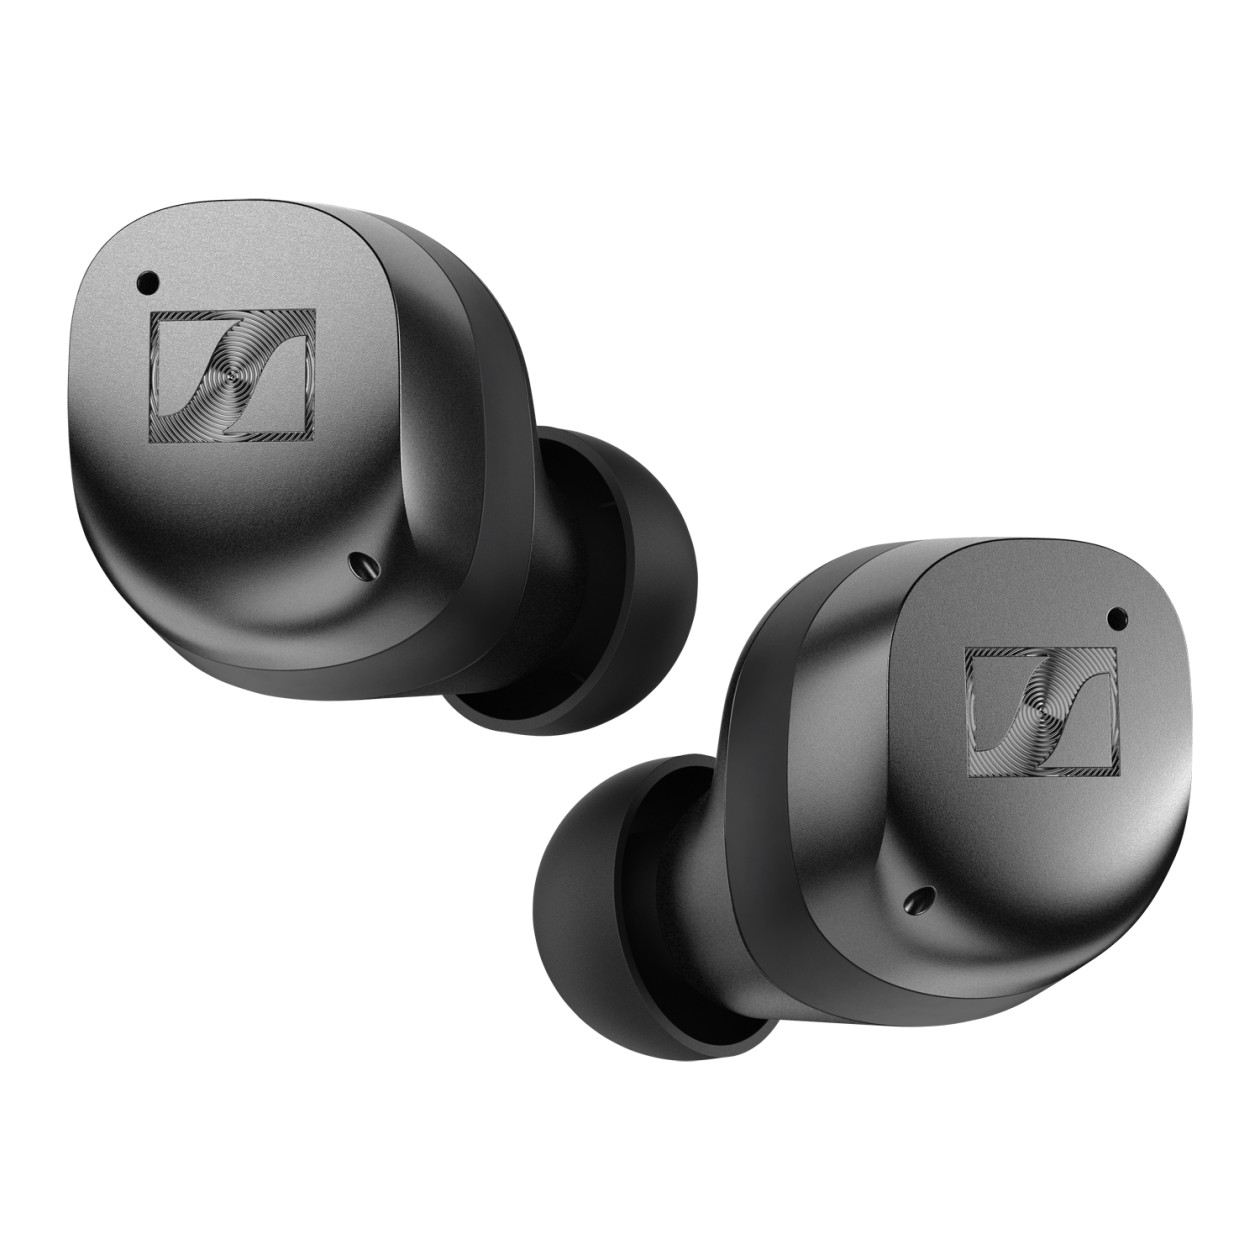 Sennheiser Momentum True Wireless 3: Specifications, colours and 